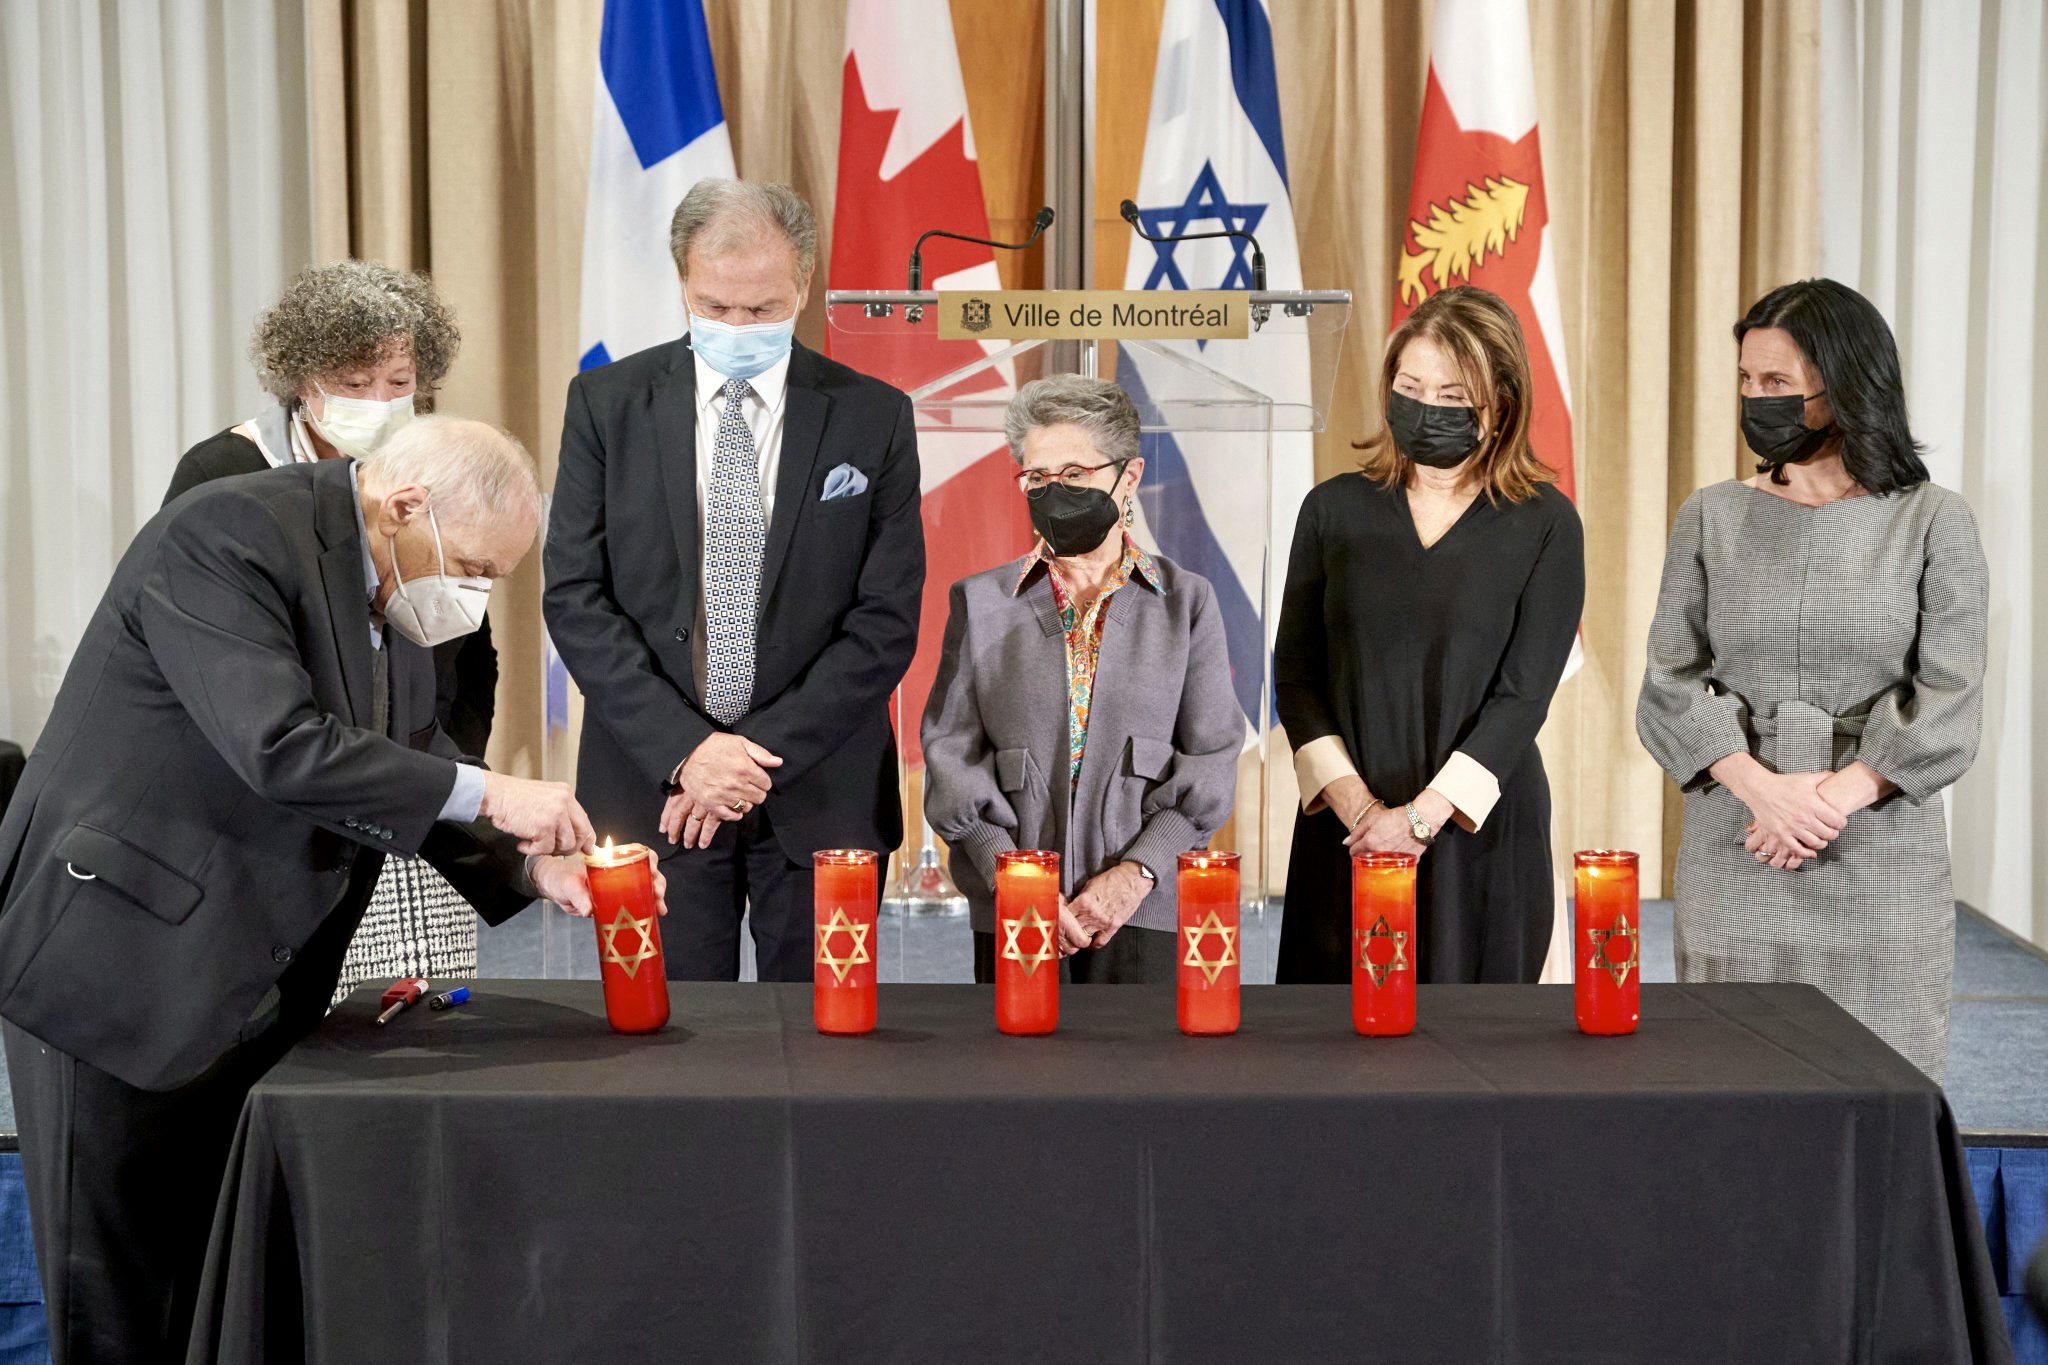 Yom HaShoah Montreal new Holocaust Museum remembrance day